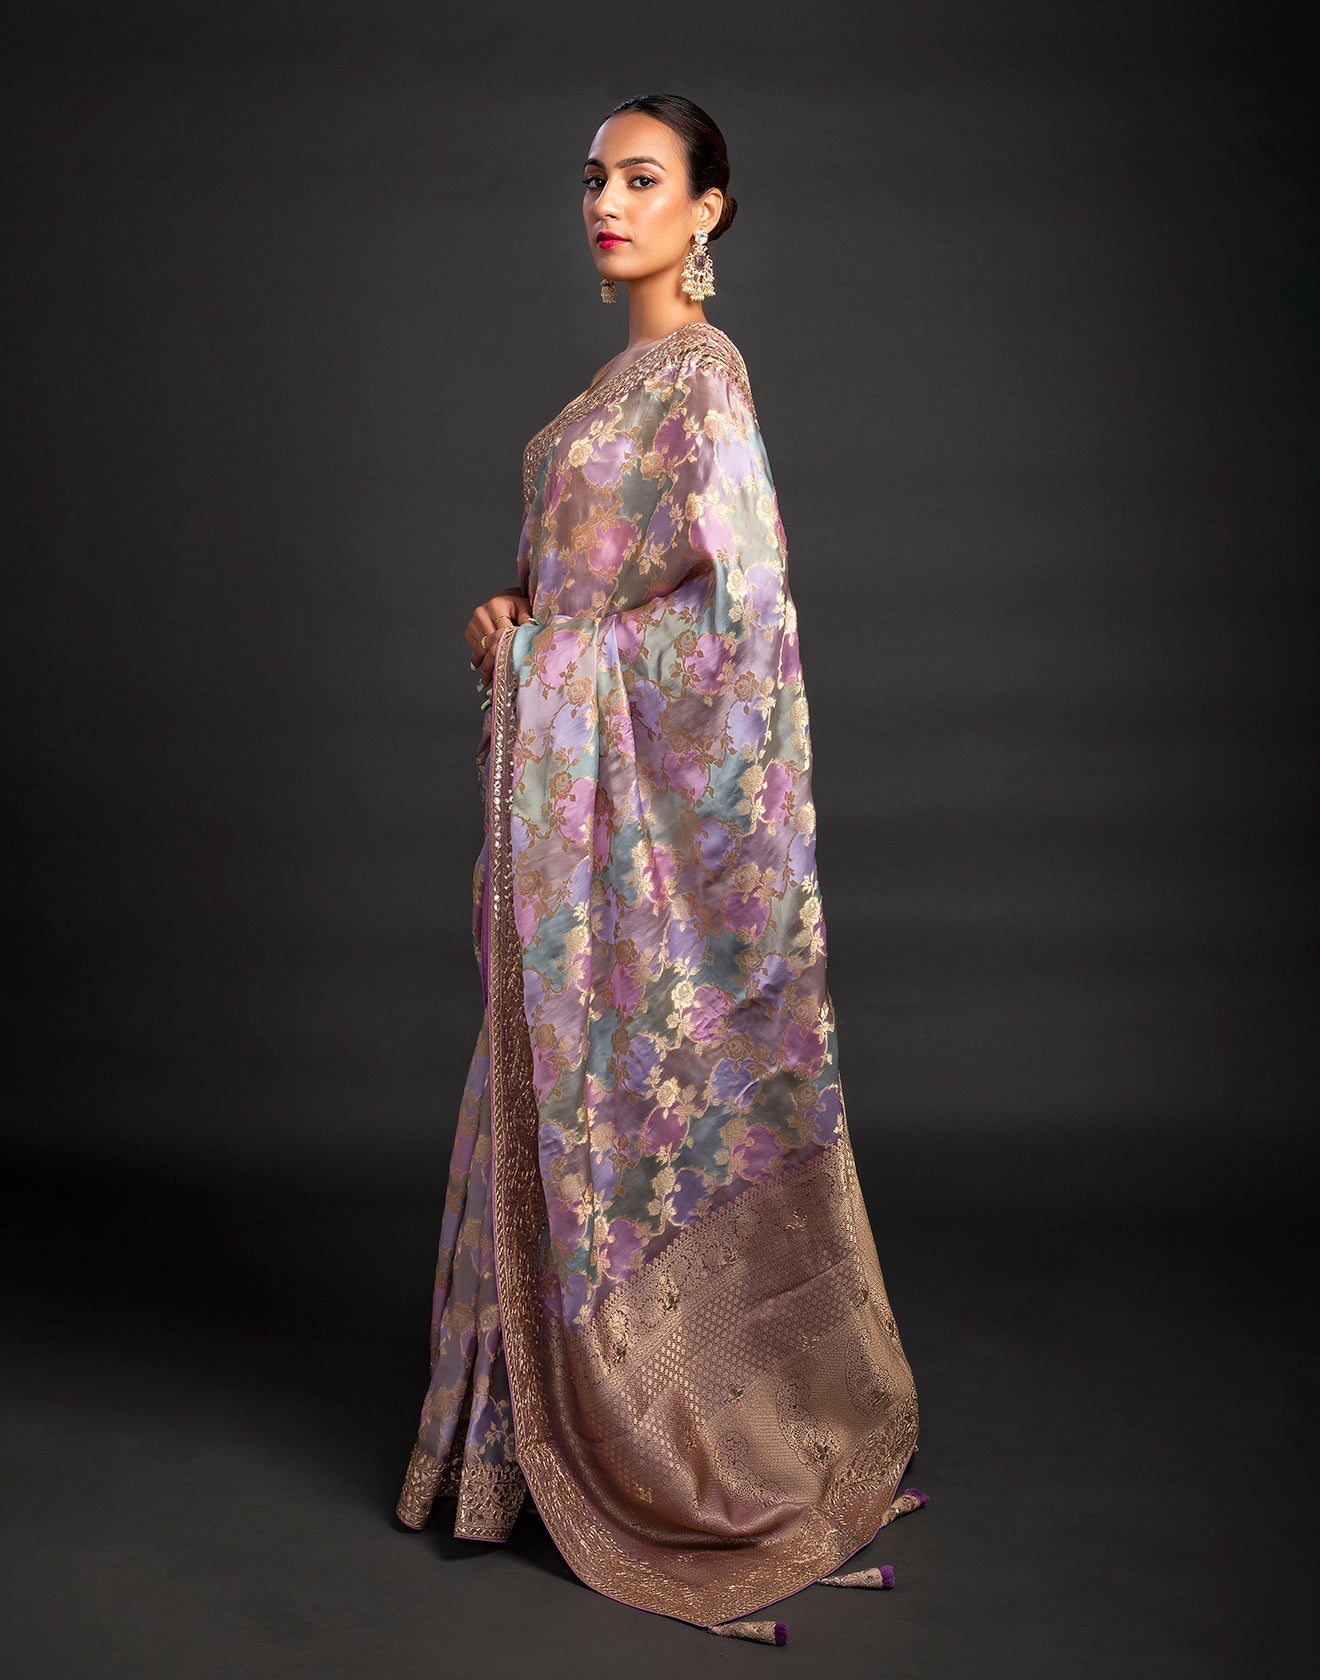 Mauve Saree In Dupion Silk With Woven Floral Motifs